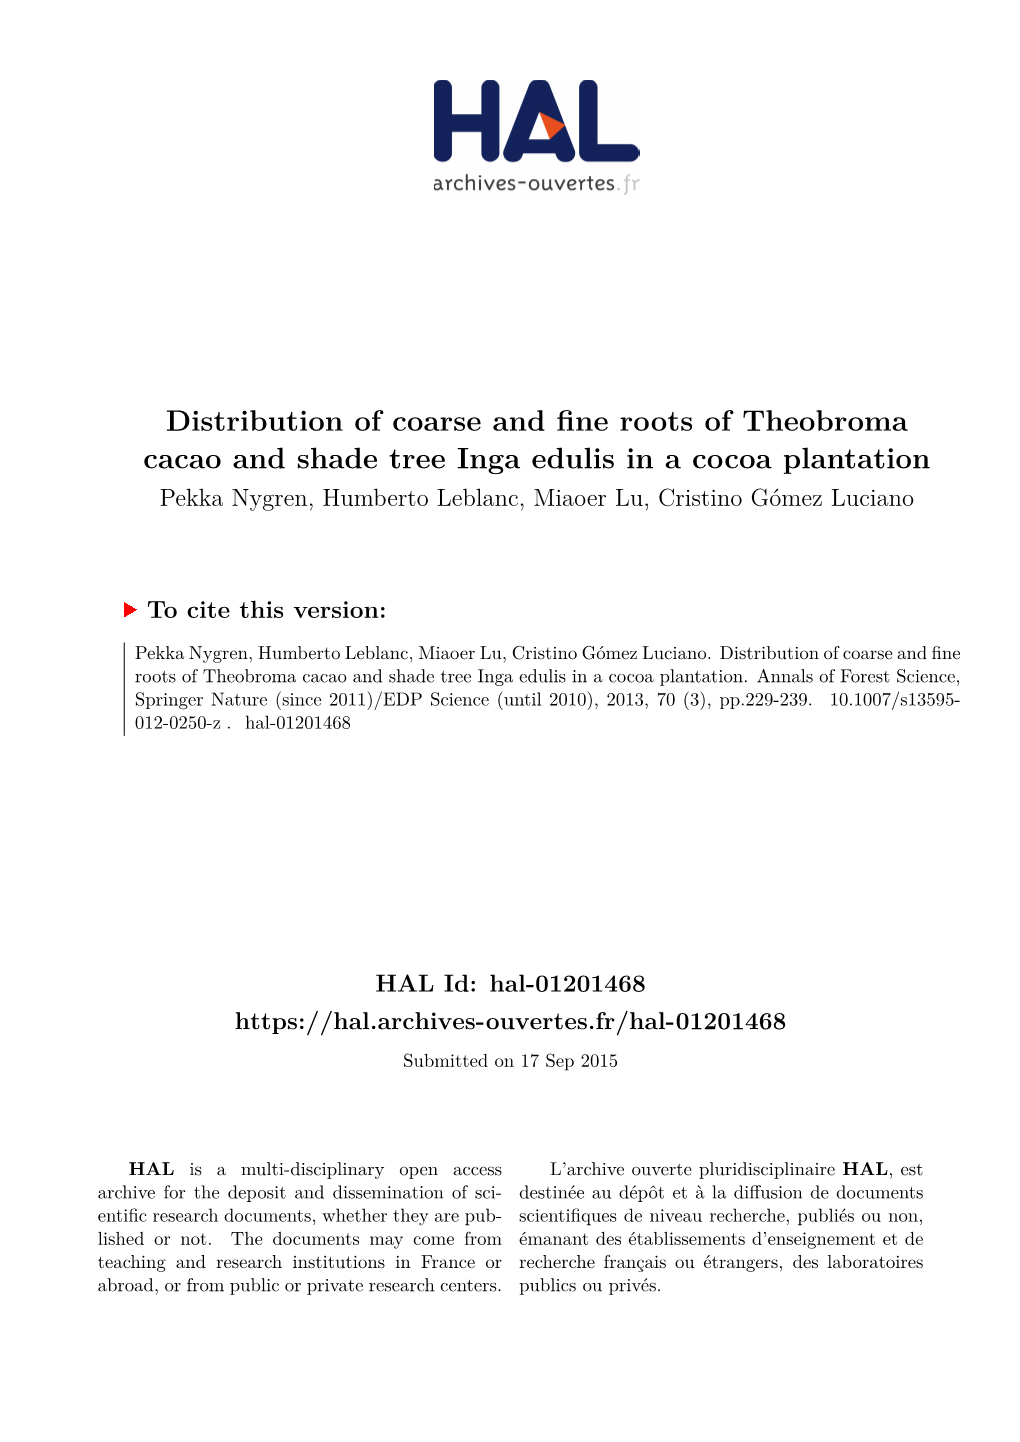 Distribution of Coarse and Fine Roots of Theobroma Cacao and Shade Tree